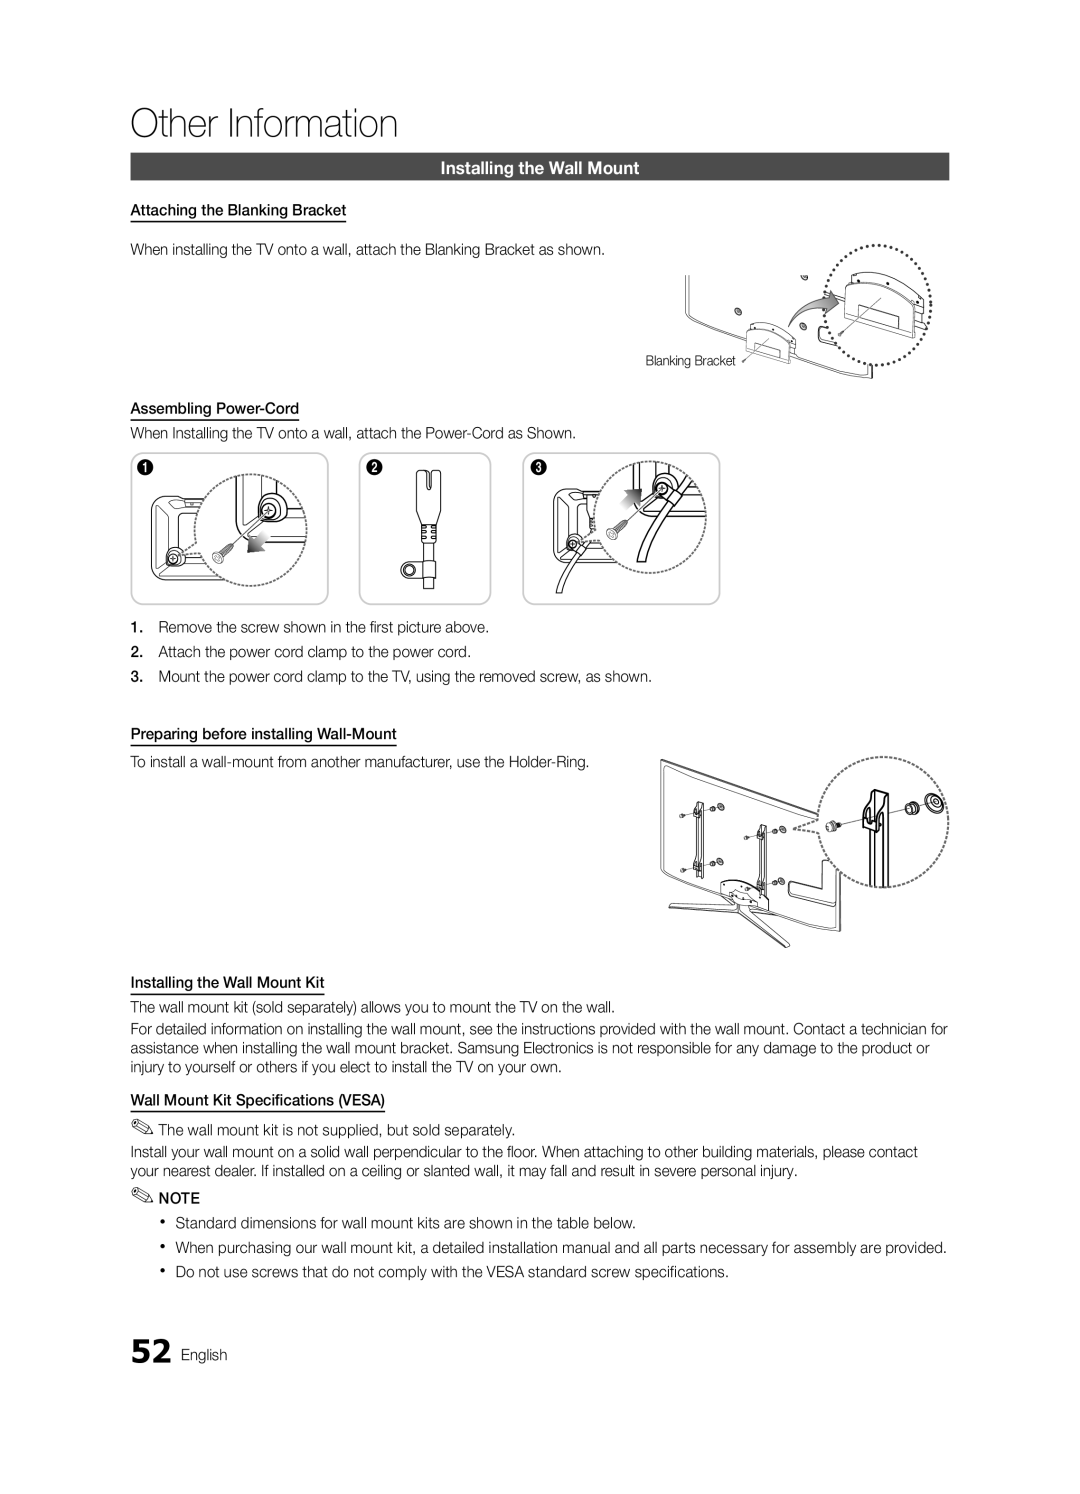 Samsung 6800 user manual Installing the Wall Mount, Other Information 